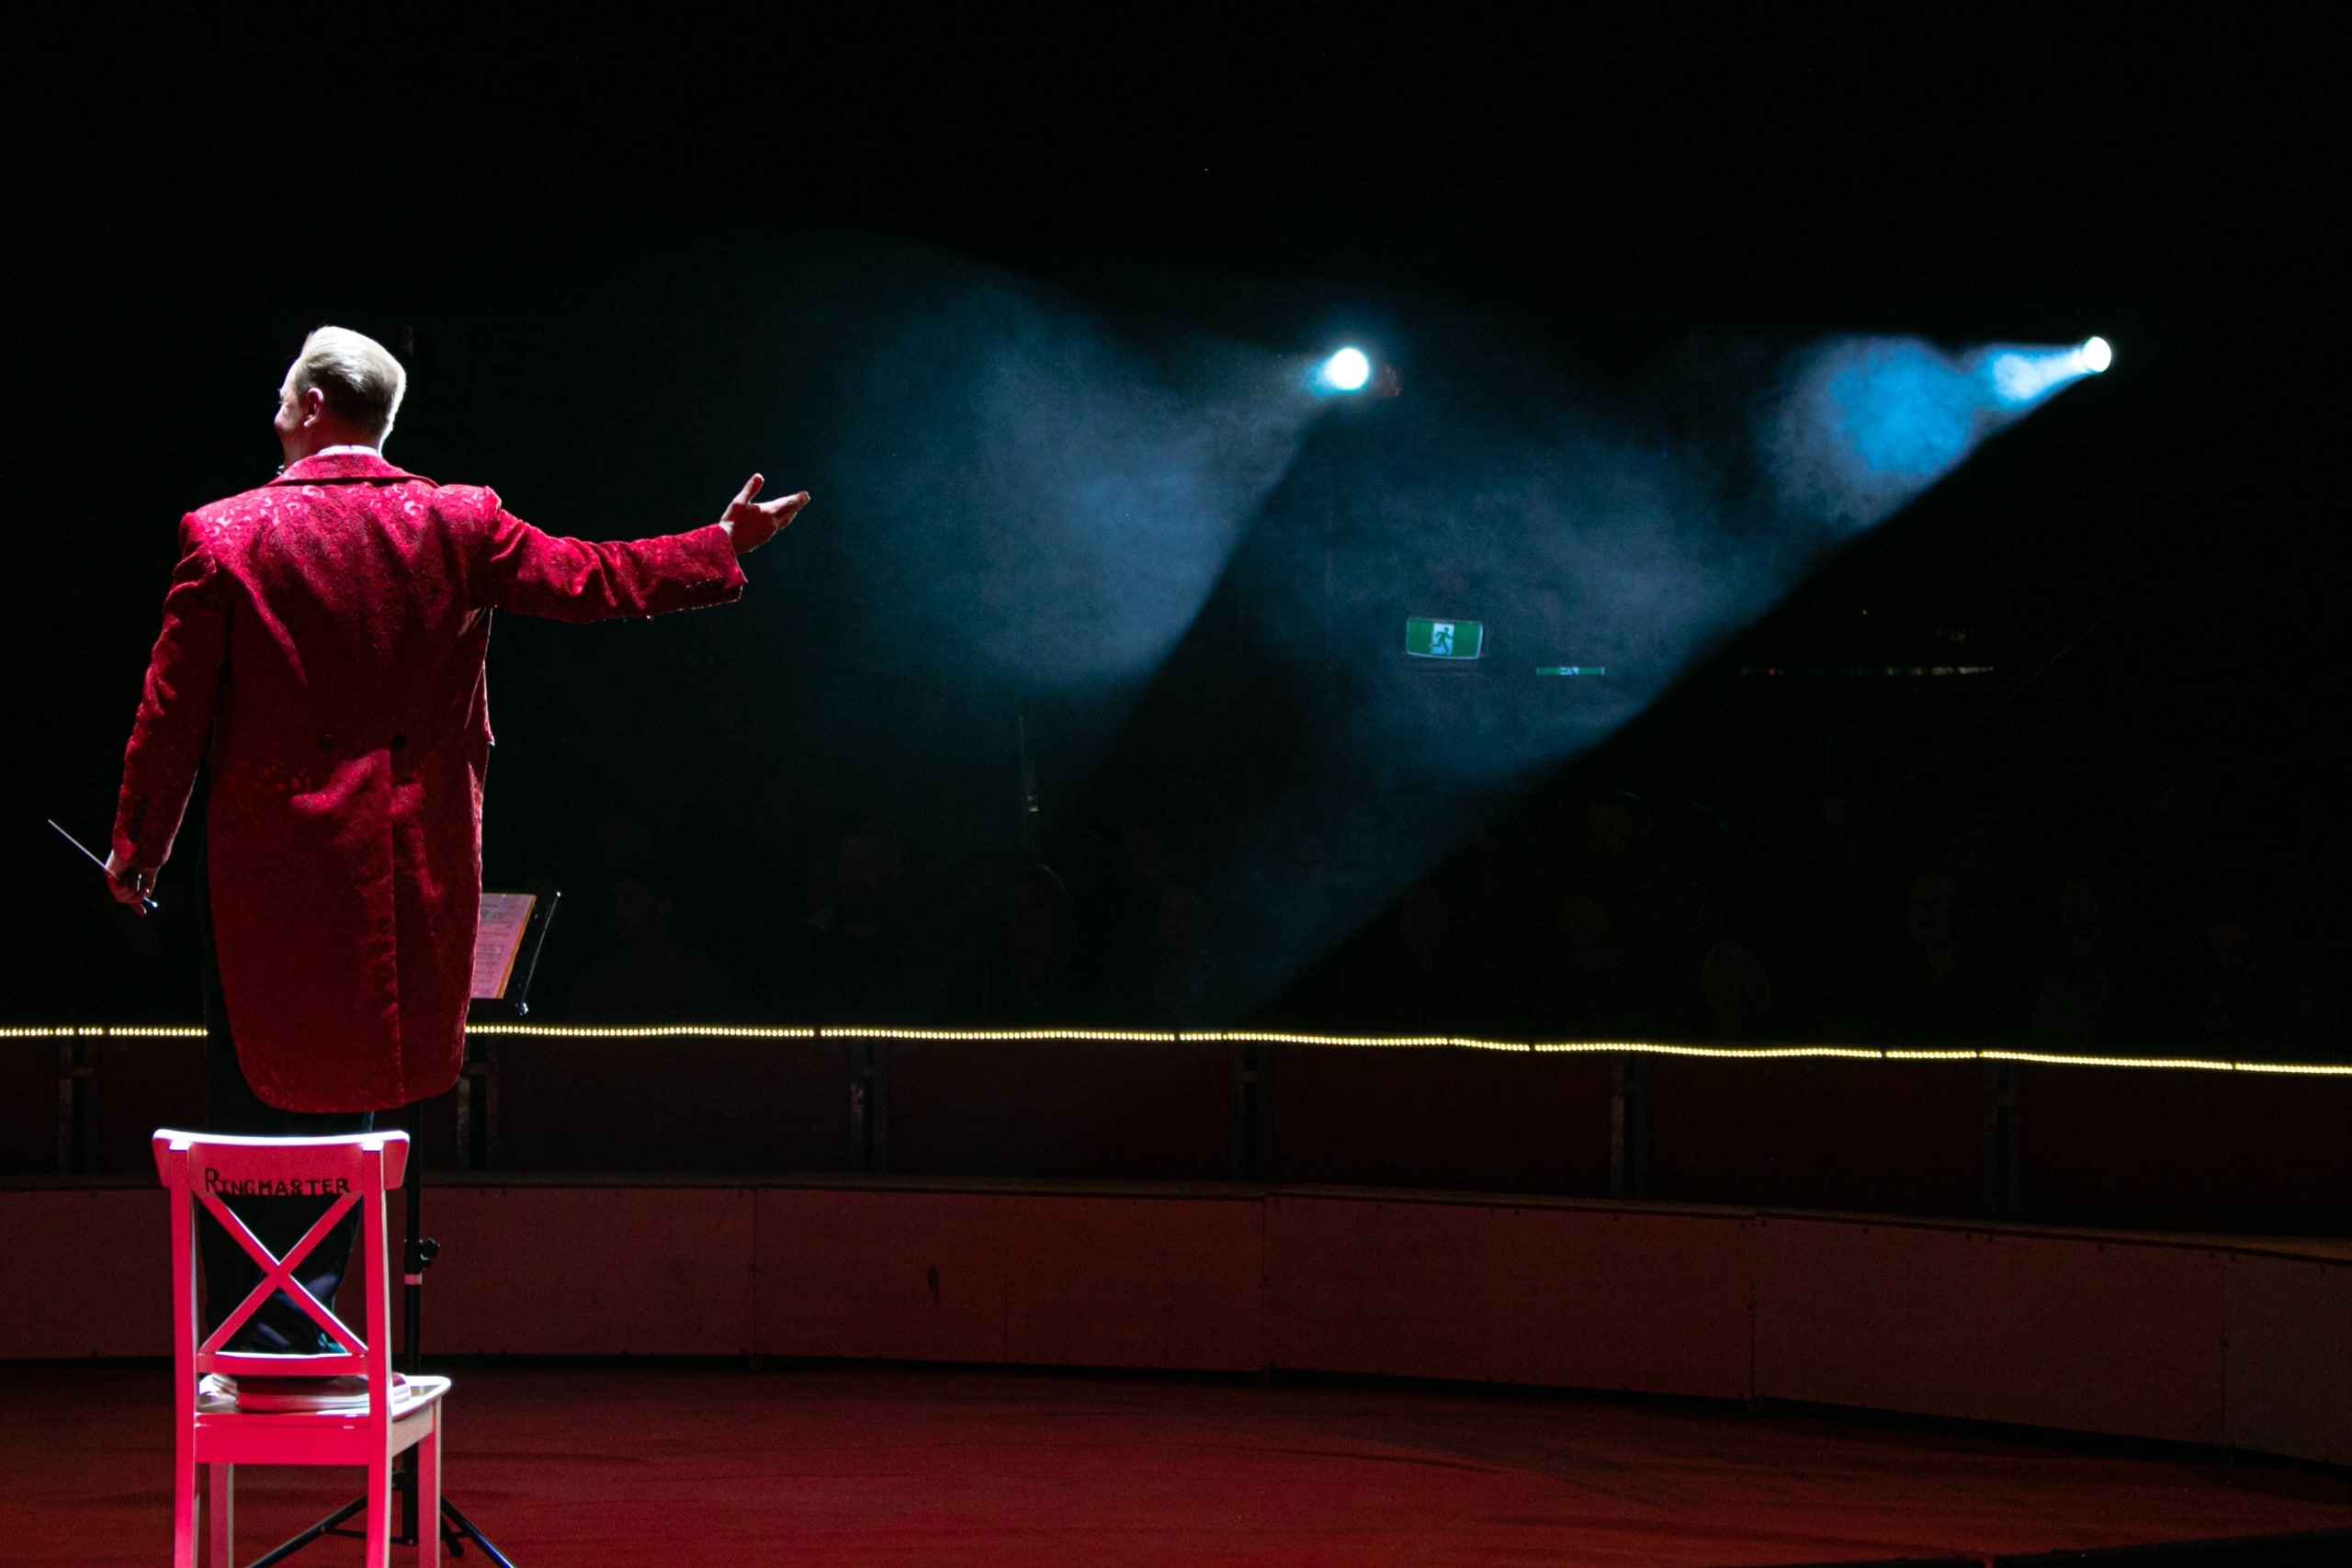 man in a red tuxedo jacket with tails conducting an orchestra we cannot see while standing on a red chair in front of stage lights in the background